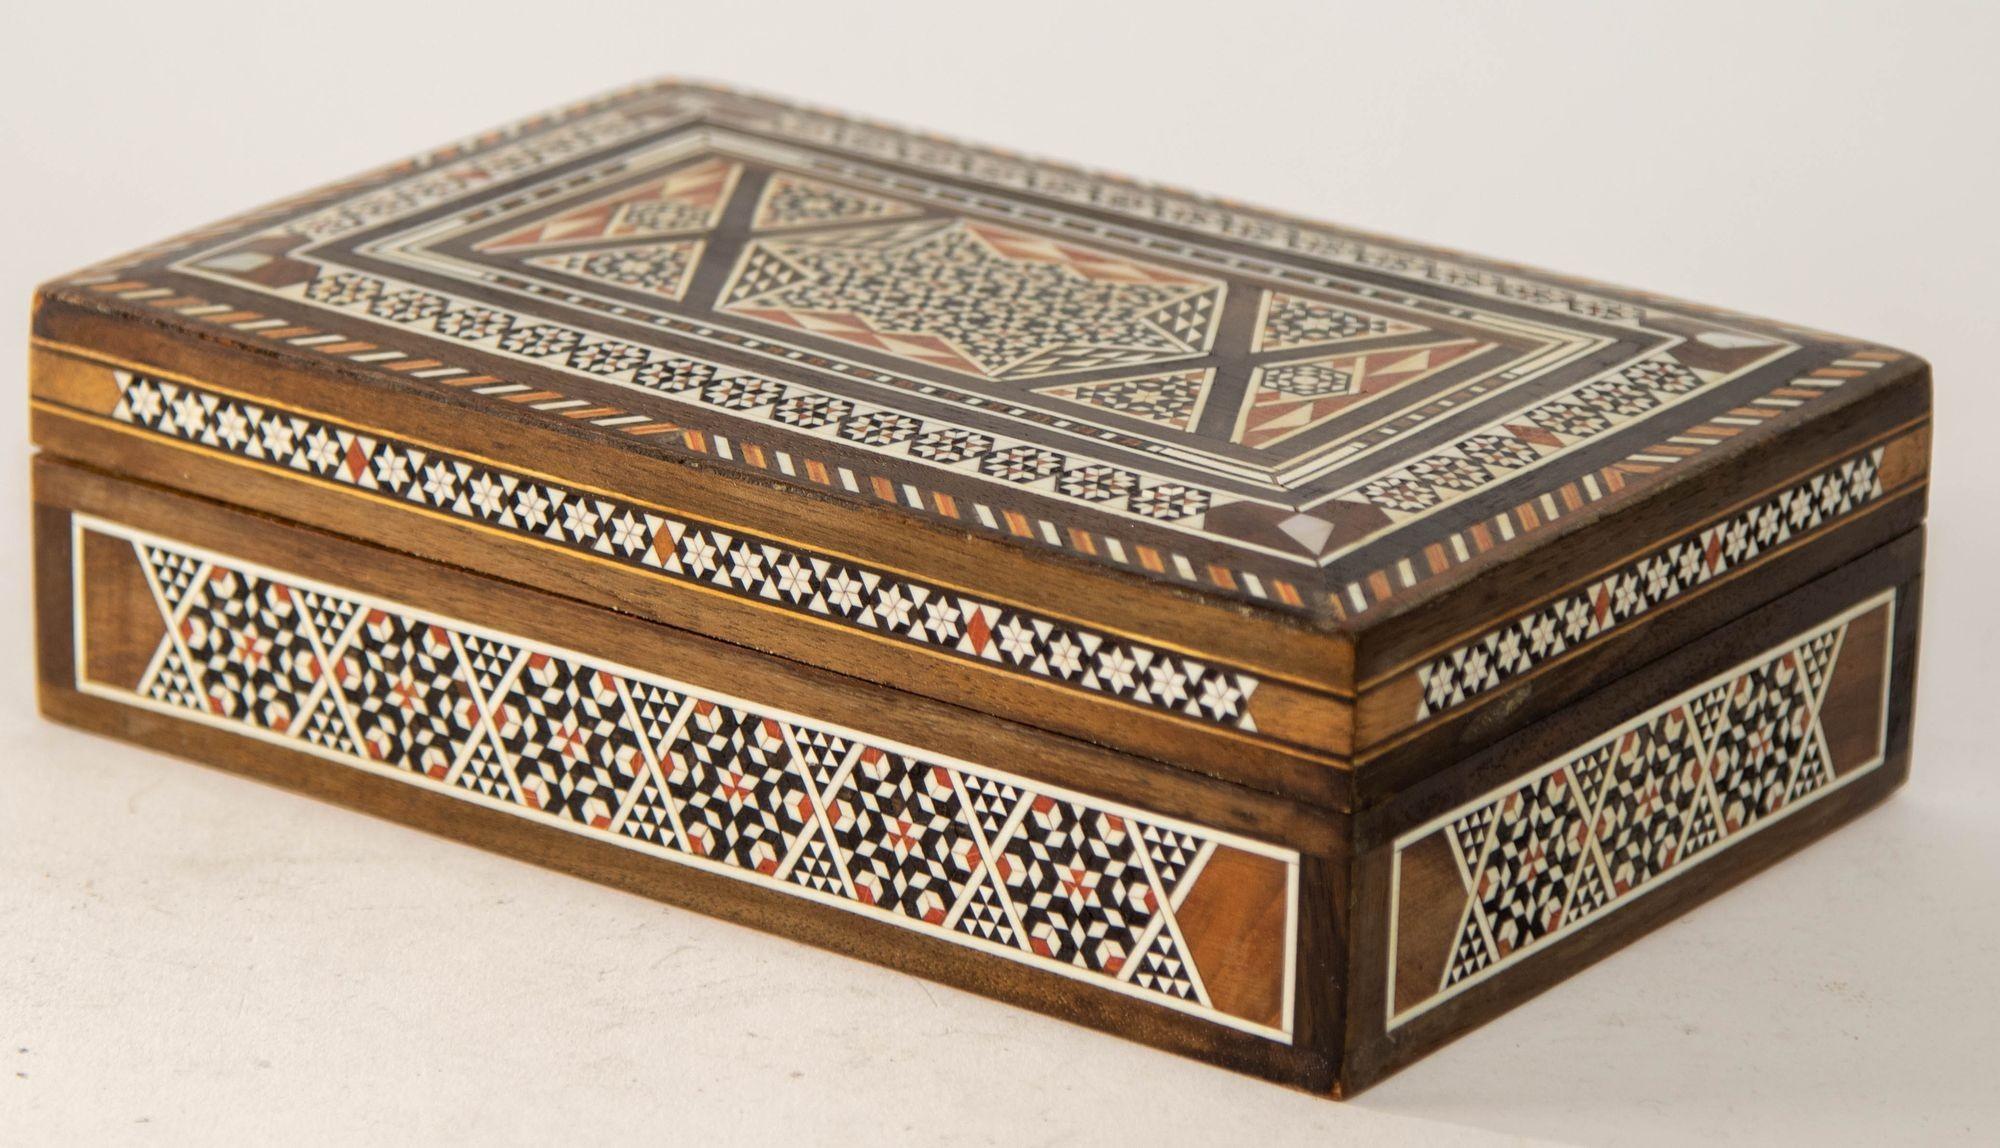 1950s Large Mosaic Mother of Pearl Inlaid Decorative Middle Eastern Islamic Moorish Box.
Vintage 1950s Mosaic Mother of Pearl Inlaid Decorative Middle Eastern Islamic Box.
Mosaic Decorative Middle Eastern Islamic Vanity Box.
Moorish Mosaic Wood Box